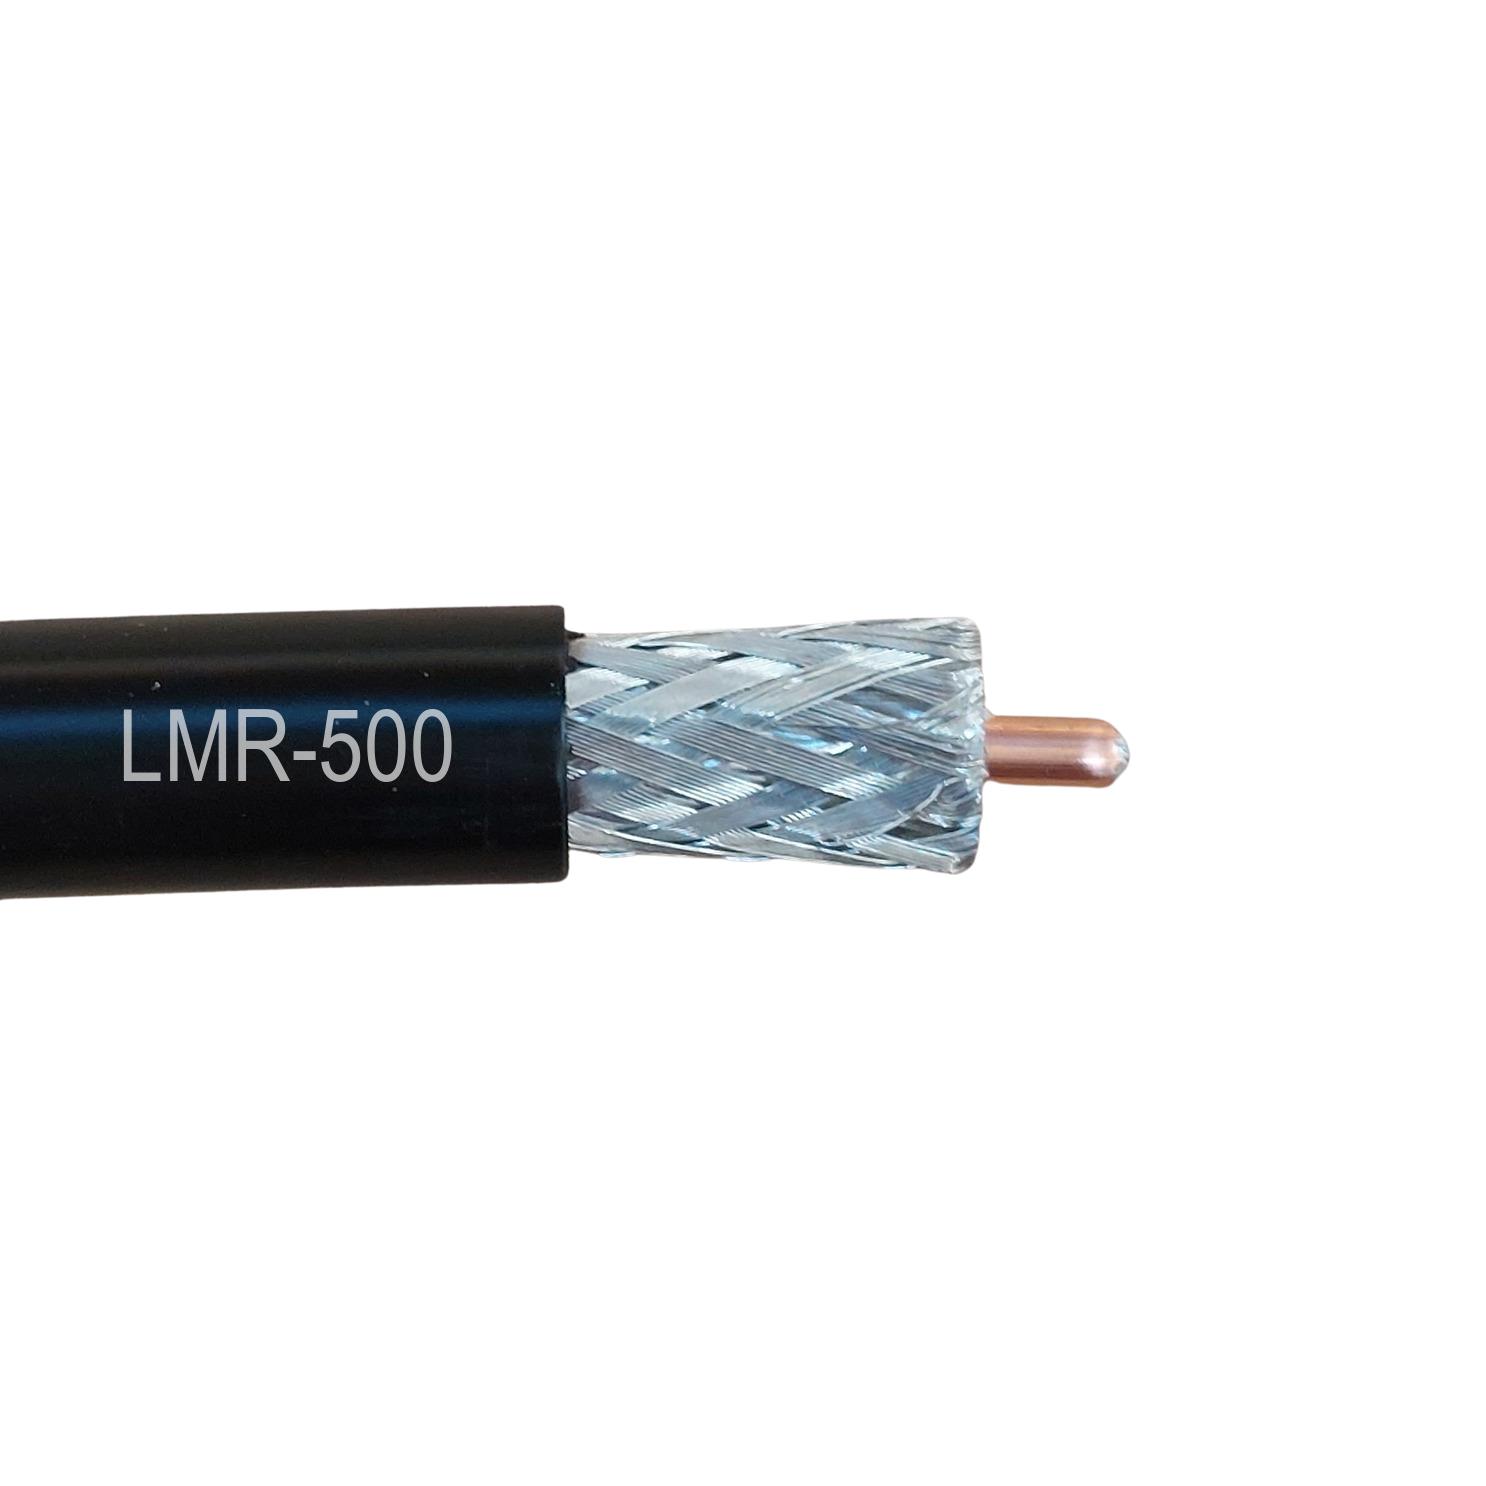 the part number is LMR-500-500Ft